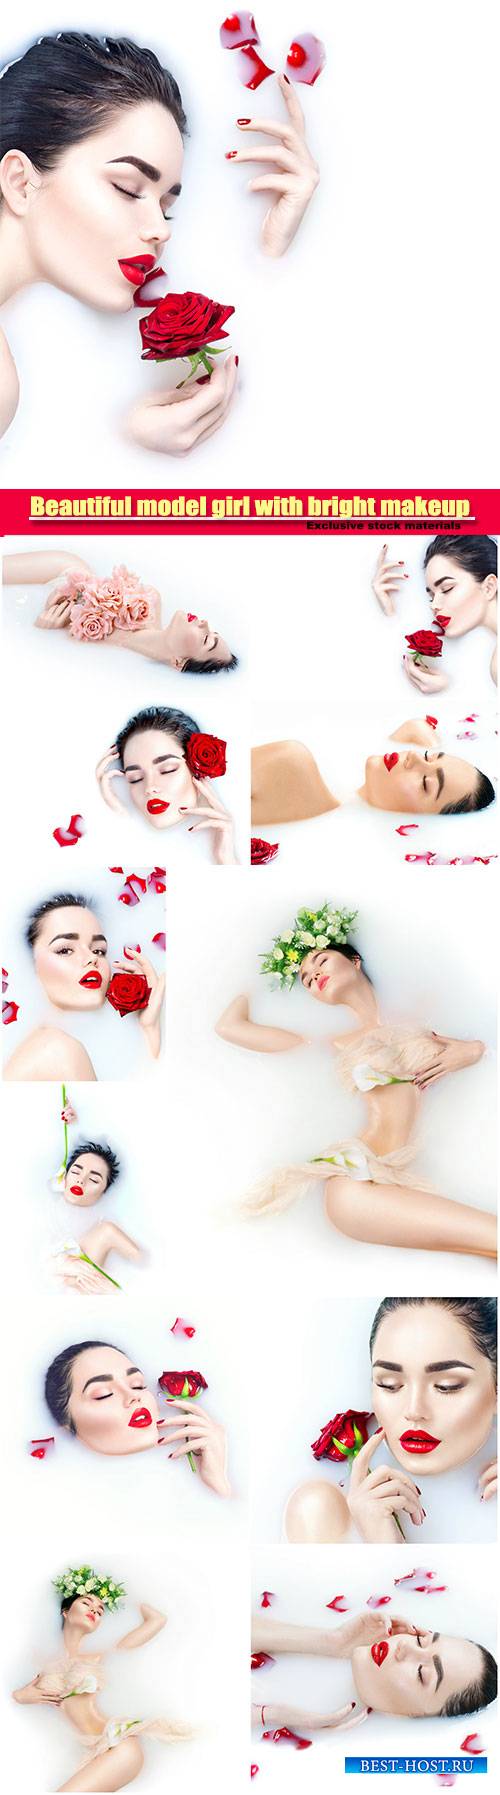 Beautiful model girl with bright makeup red rose flower in her hand and relaxing in milk bath